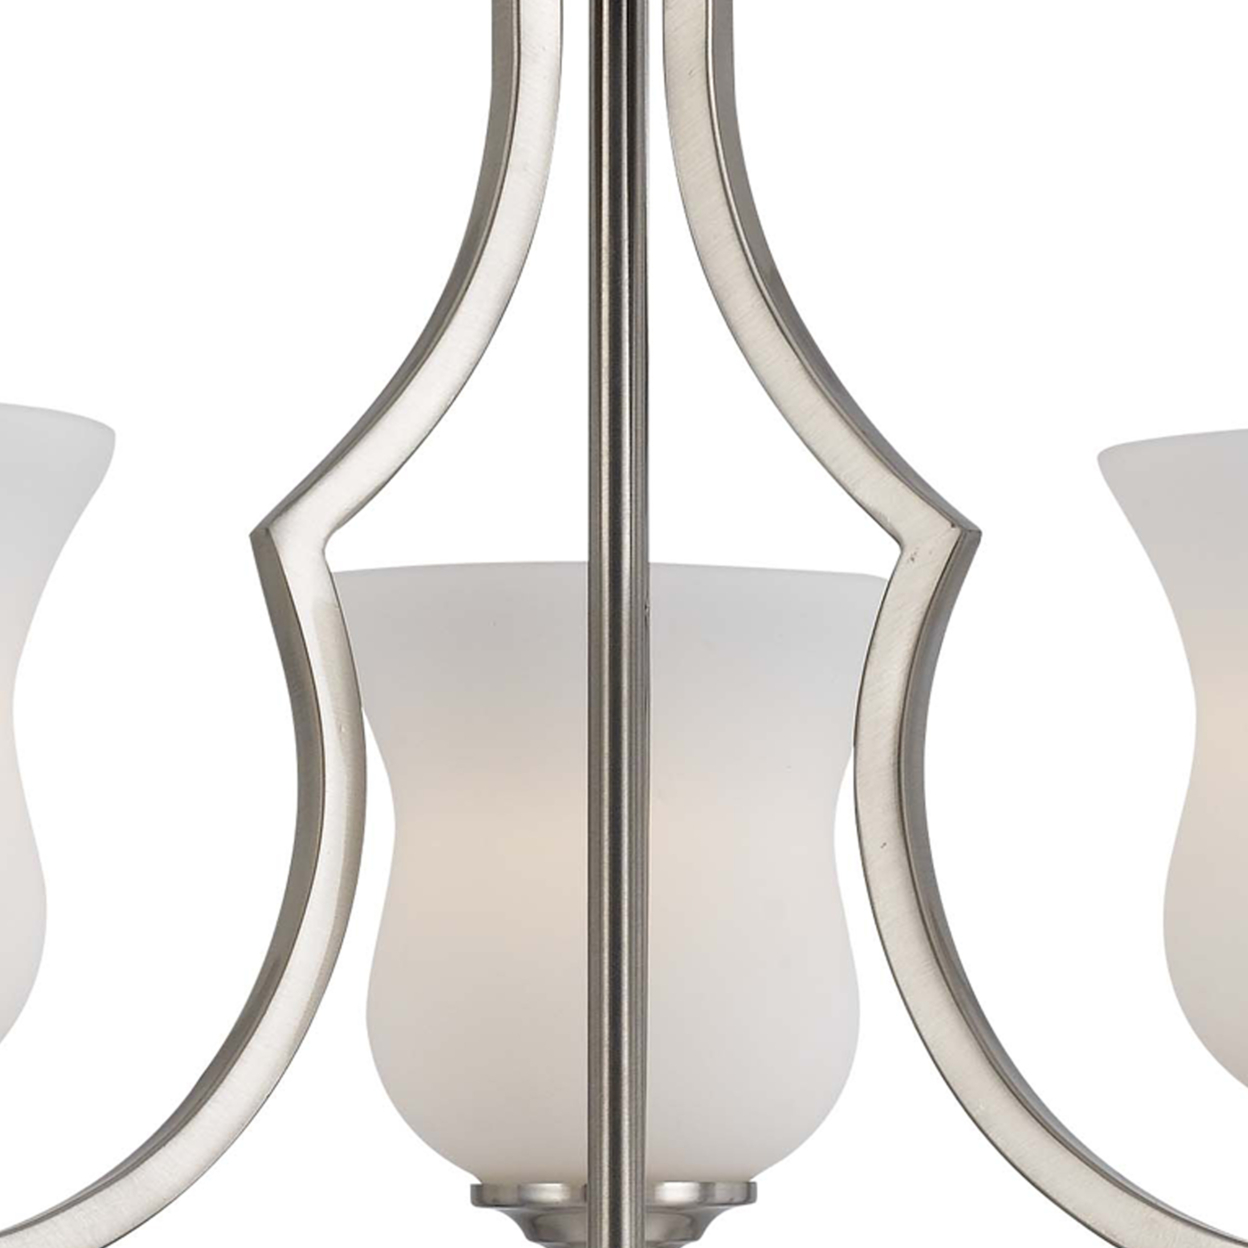 3 Bulb Uplight Chandelier With Metal Frame And Glass Shades,Silver And White- Saltoro Sherpi